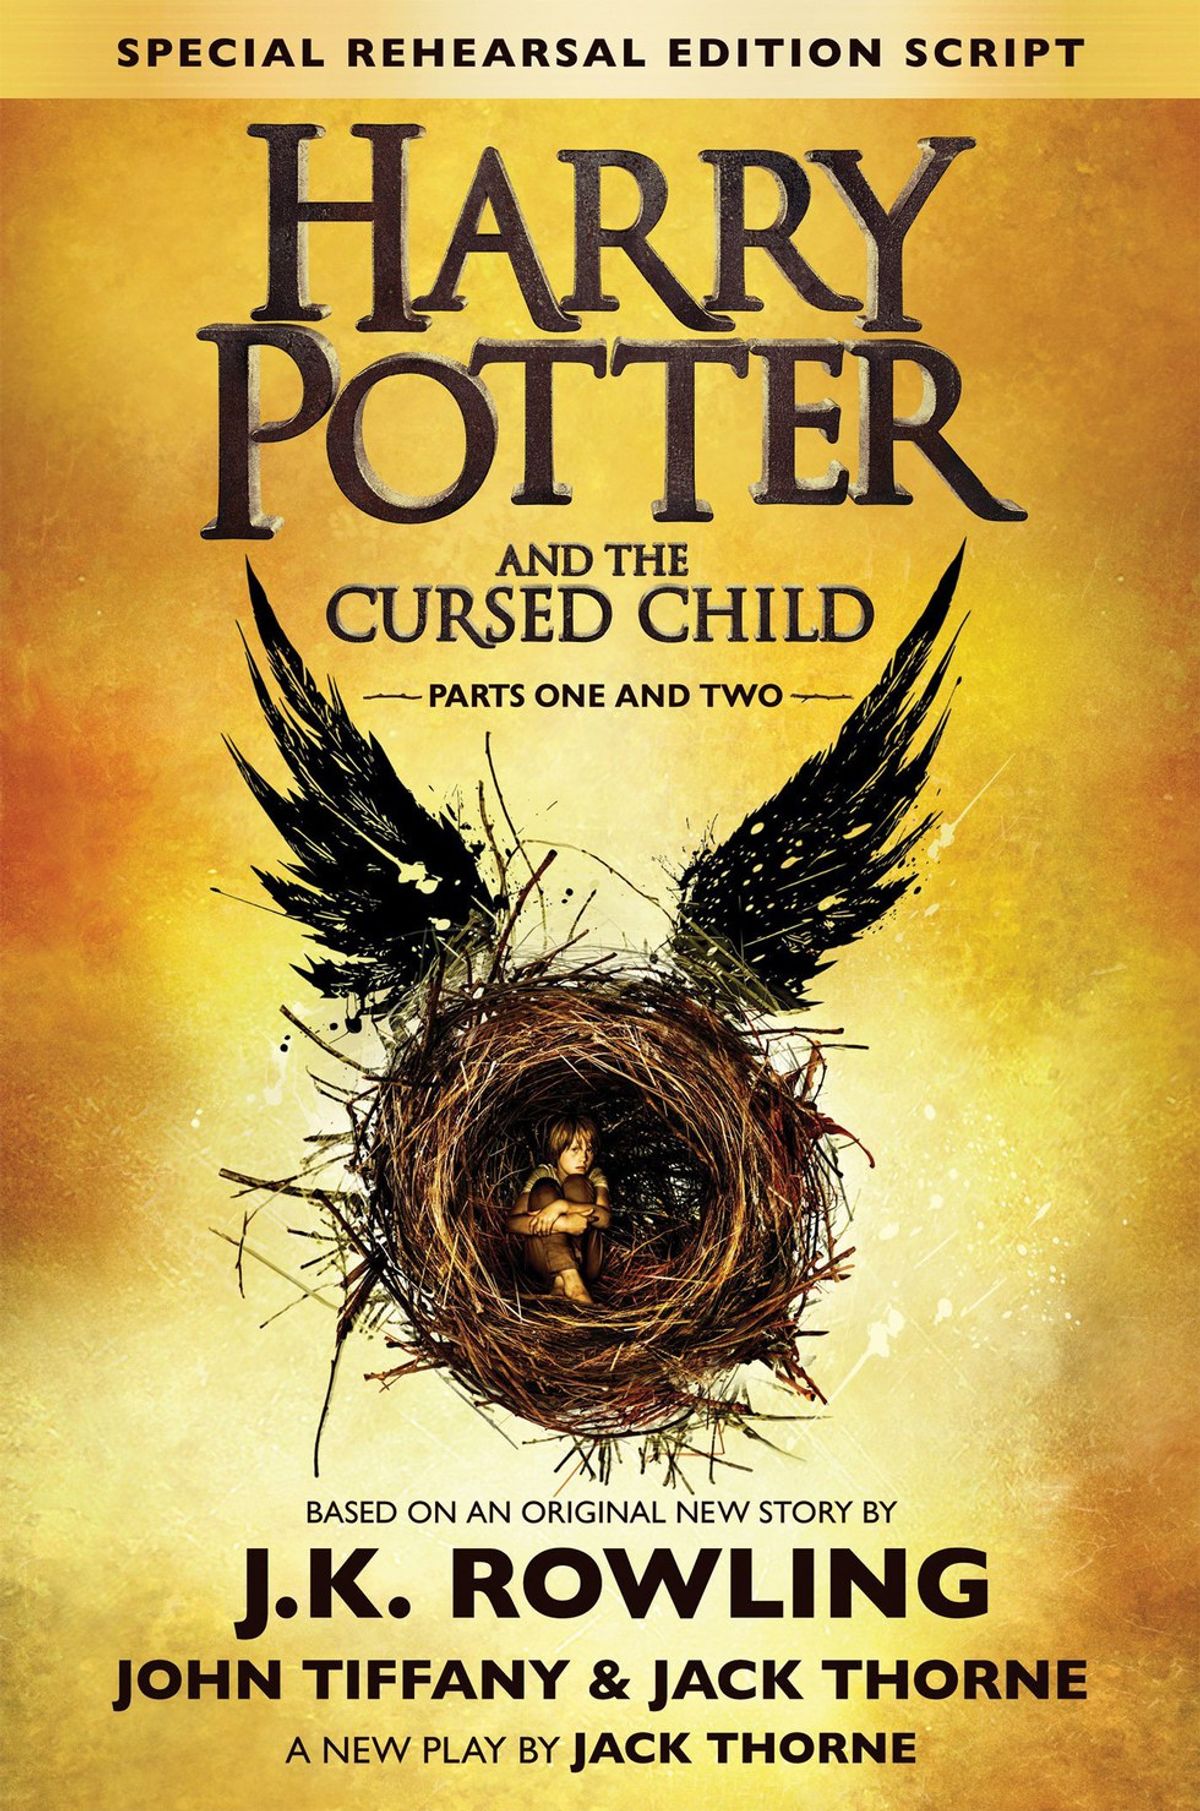 5 Cringe-Worthy Moments In "Harry Potter And The Cursed Child"